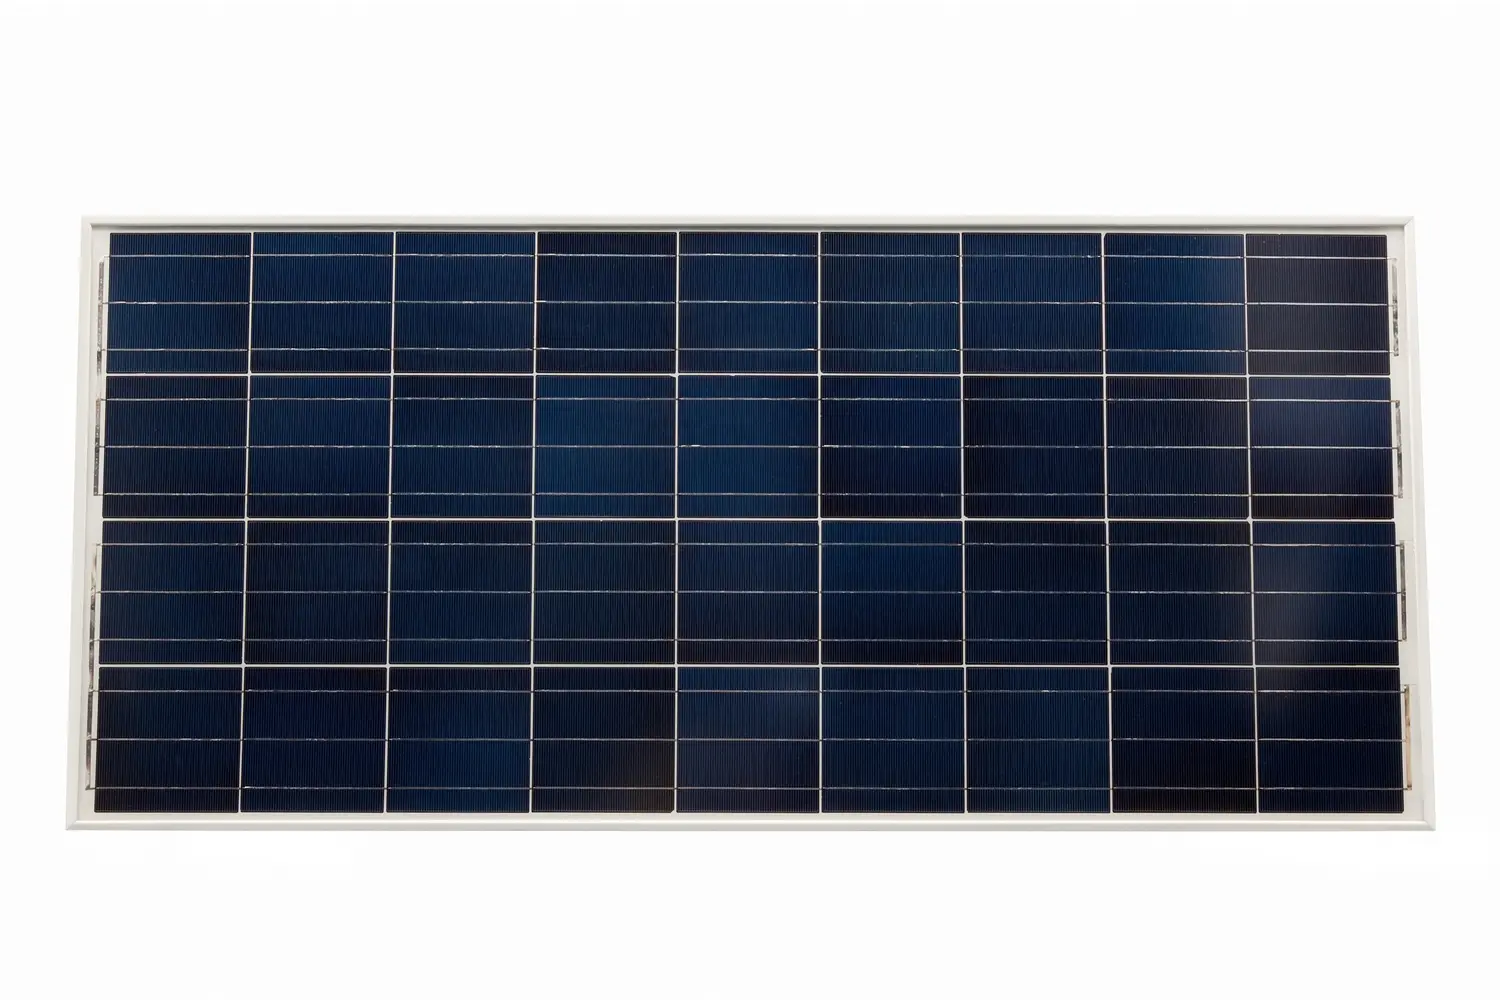 blue solar panels - Why is the color of solar panels blue